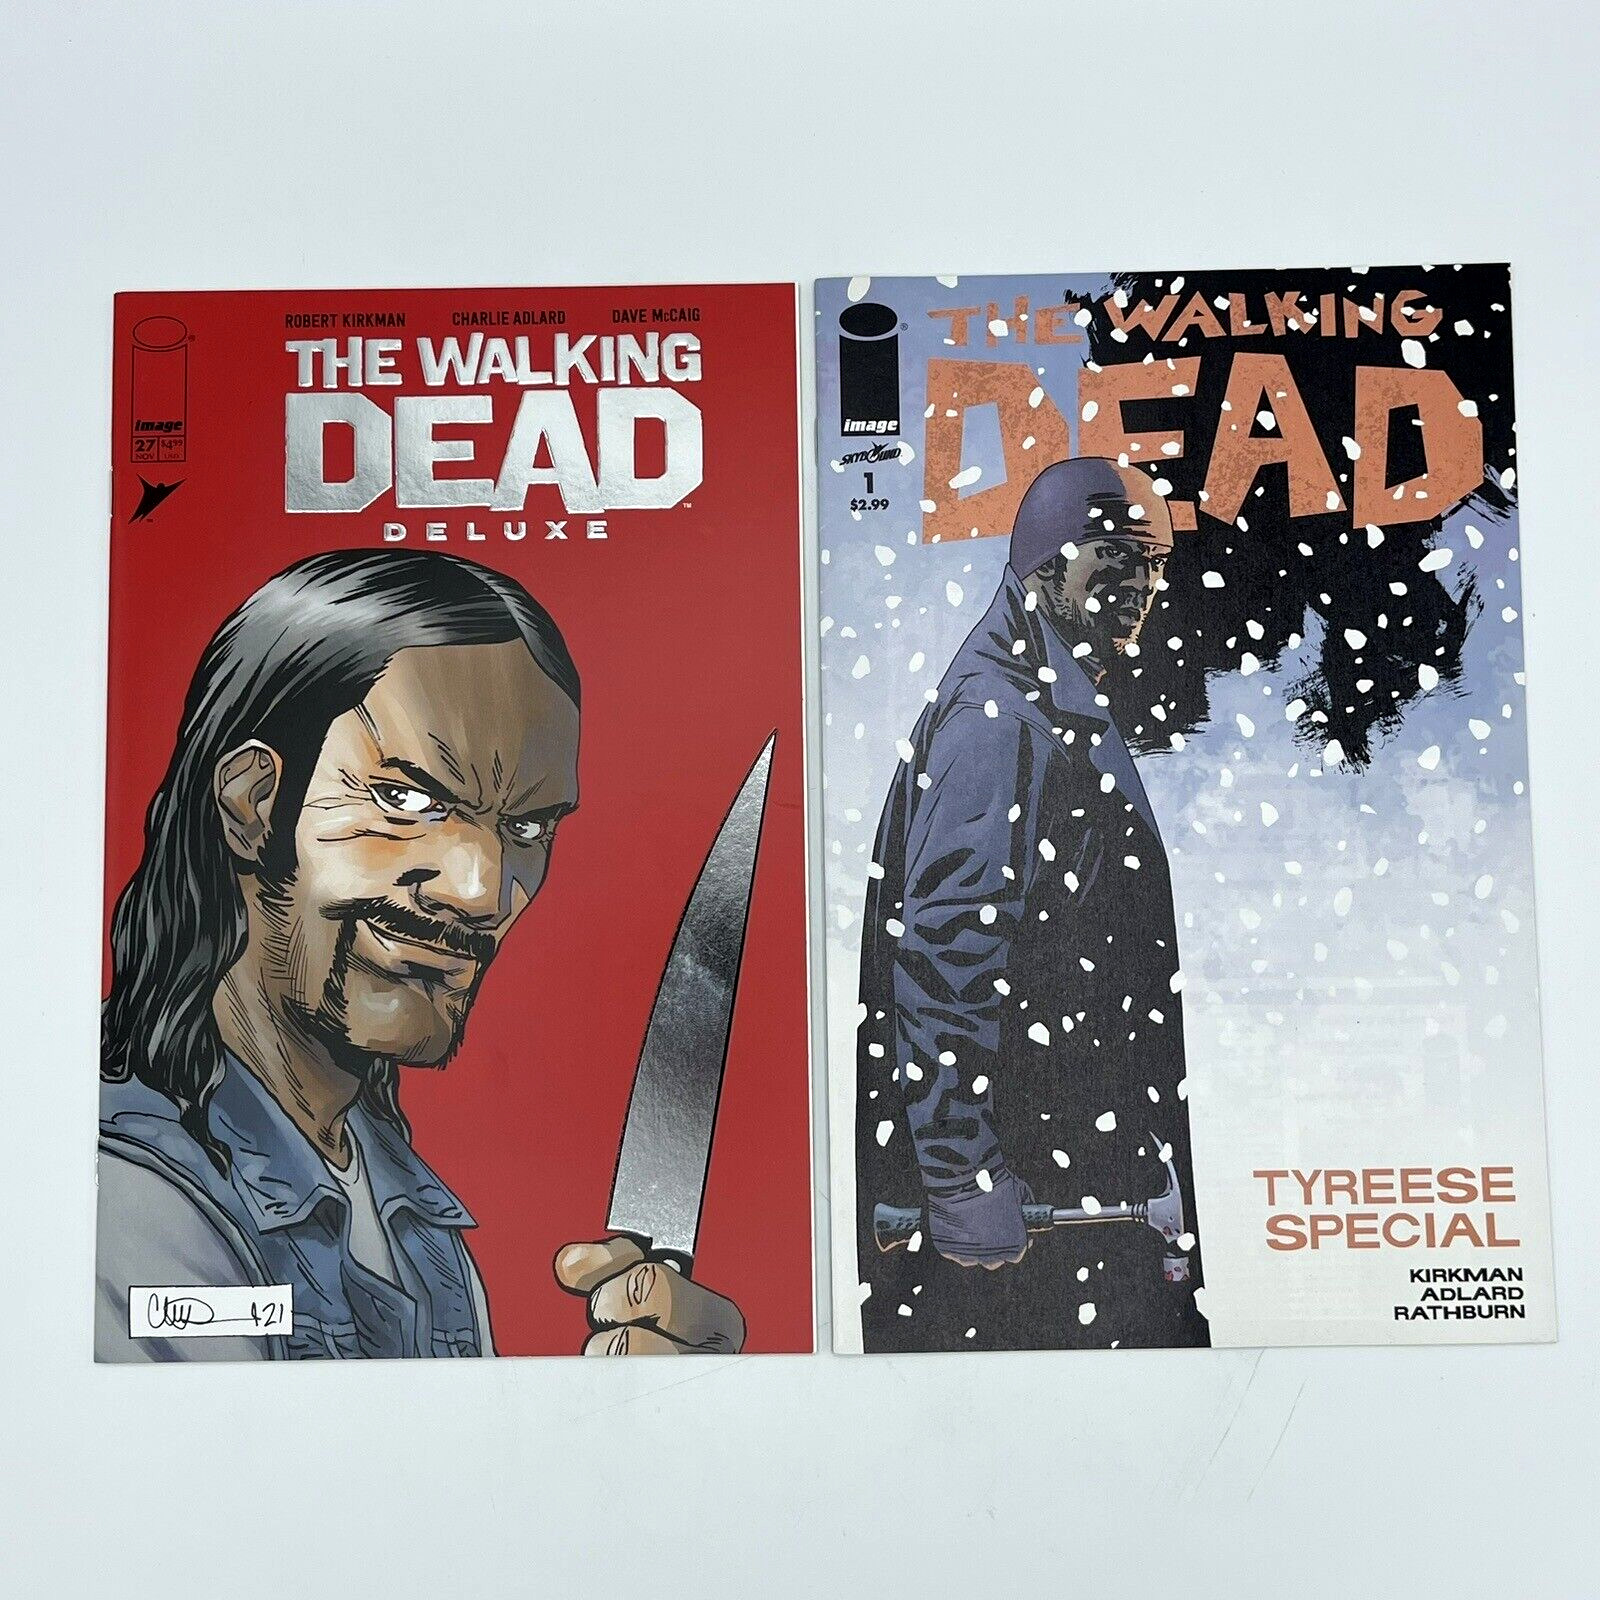 THE WALKING DEAD #1 Tyreese Special & DELUXE #27 LCSD Foil Variant 2021 Comics